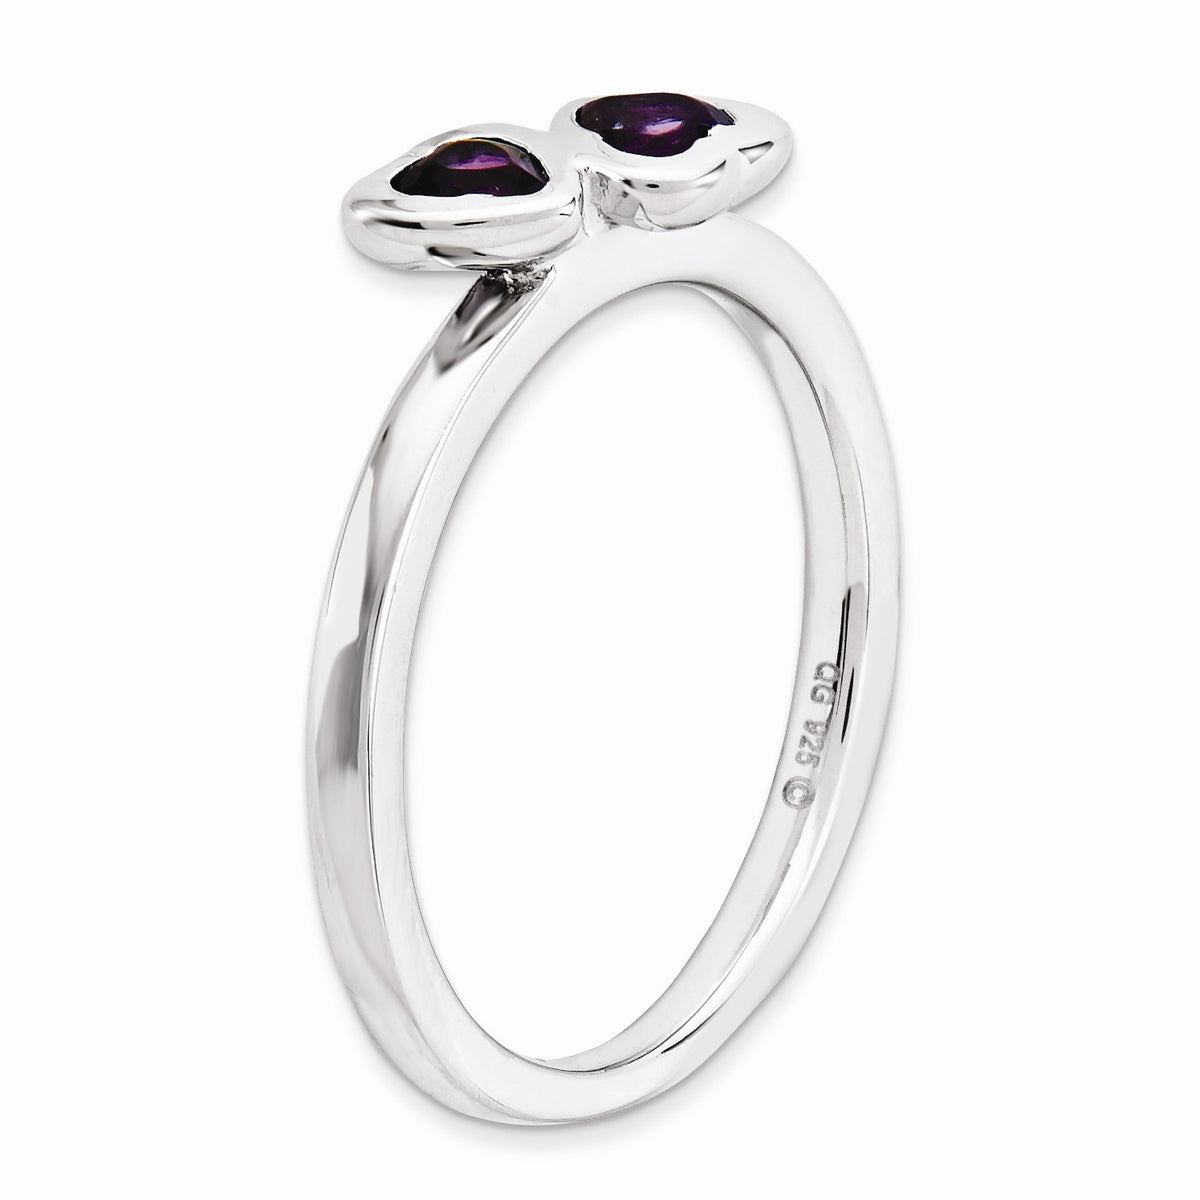 Alternate view of the Rhodium Plated Sterling Silver &amp; Amethyst Stackable 2 Stone Heart Ring by The Black Bow Jewelry Co.